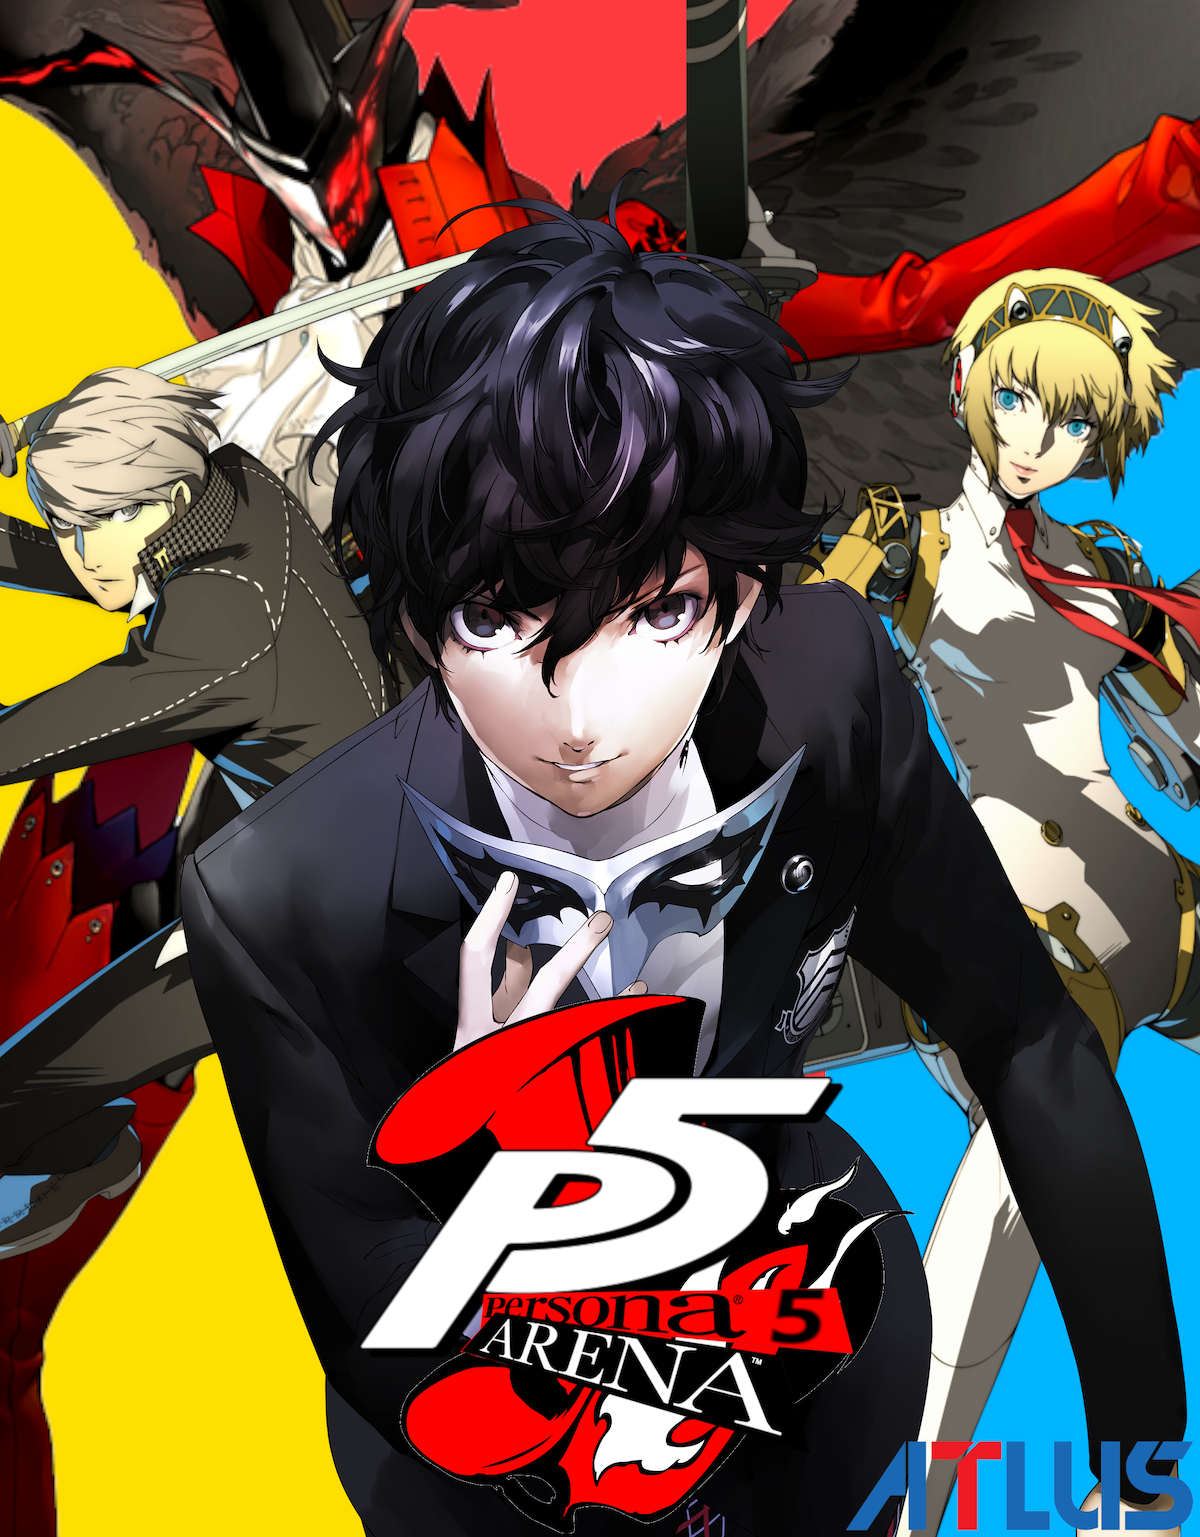 Persona 5 strikers makes me want to replay the original Persona 5 - Vanguard